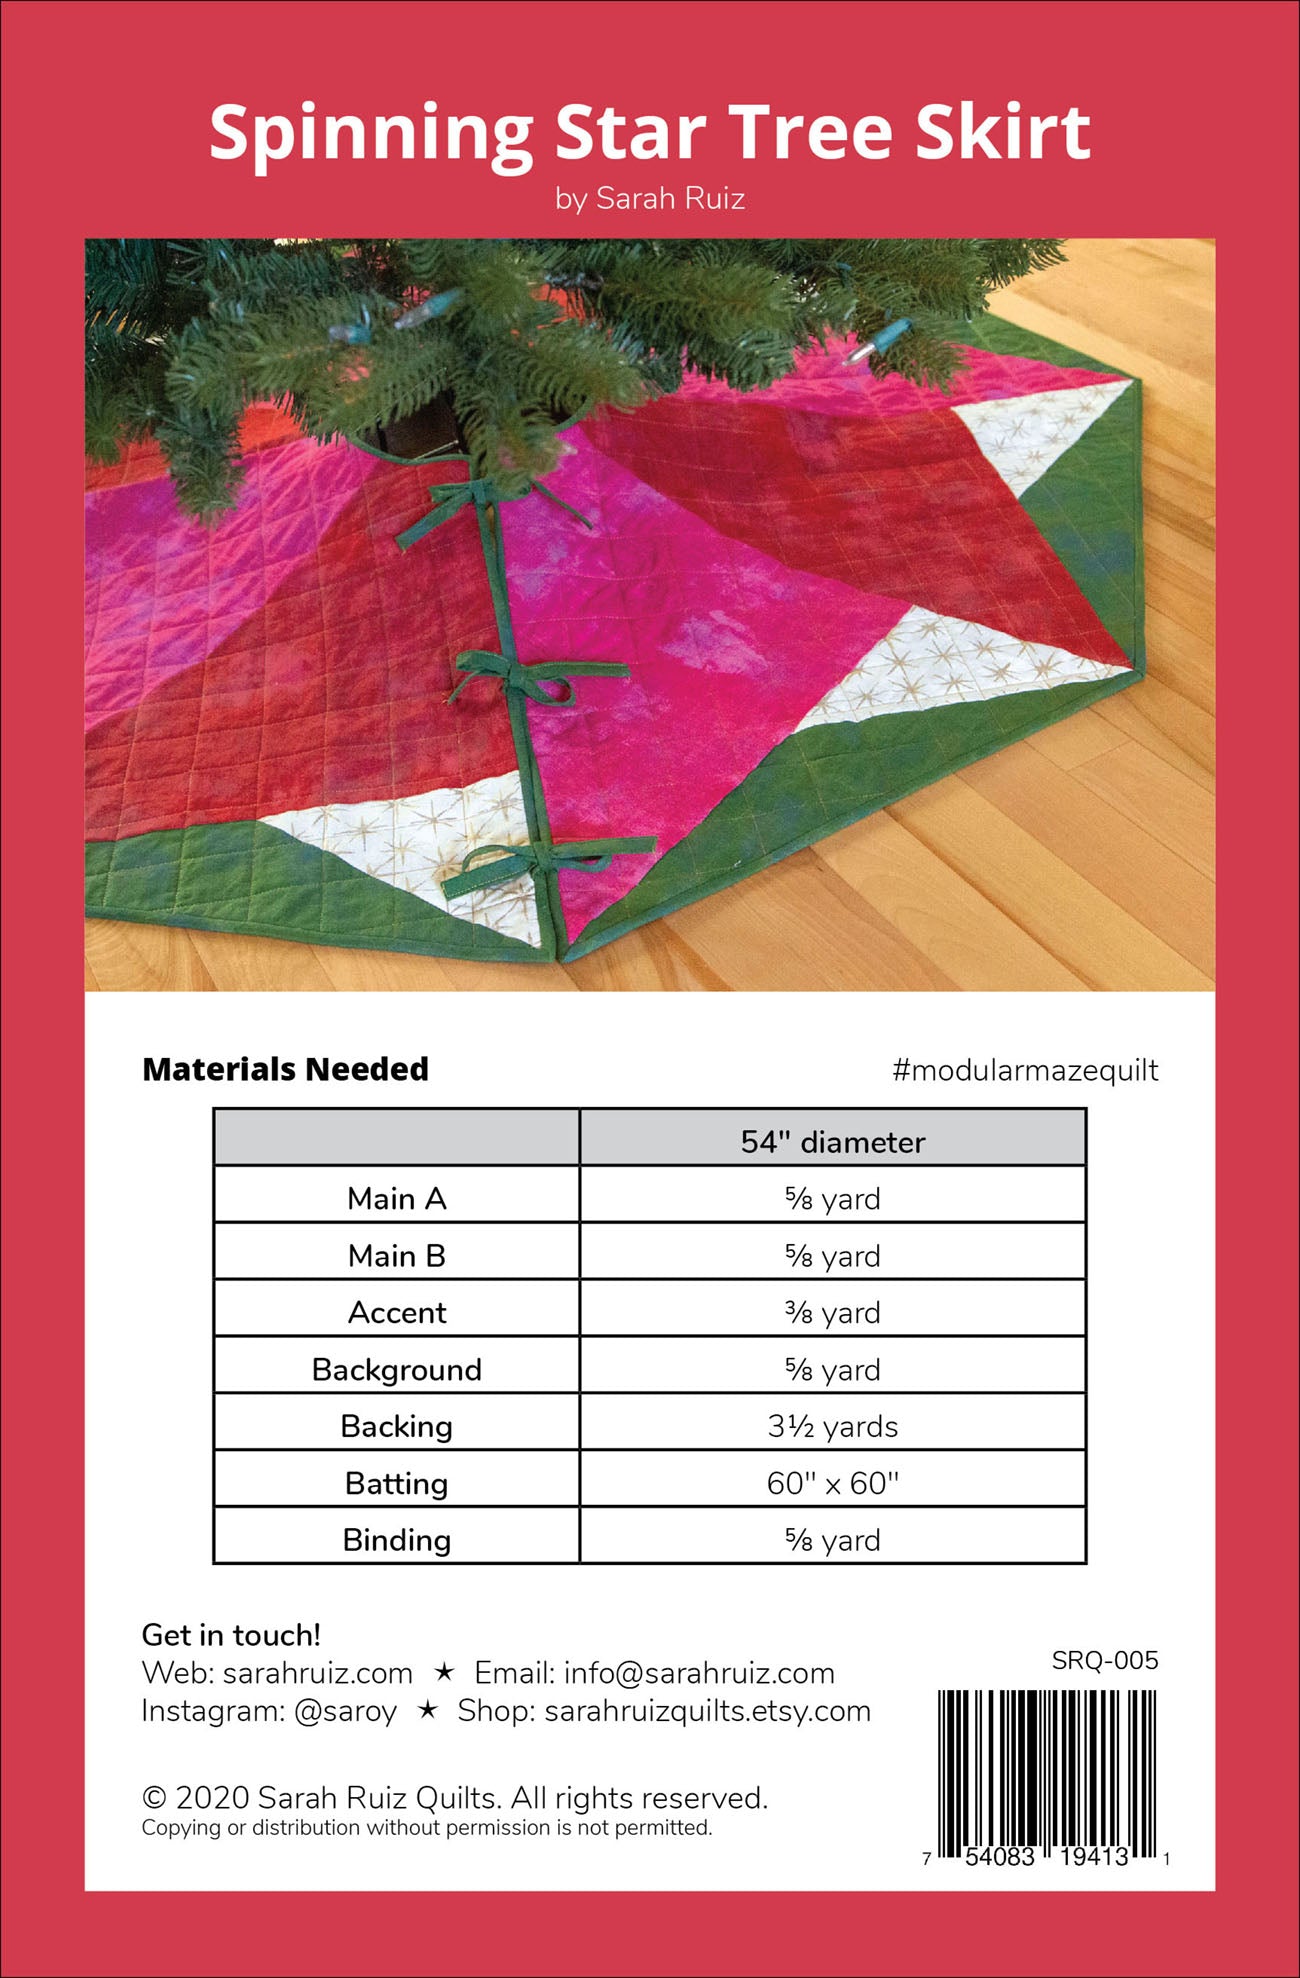 Spinning Star Tree Skirt Sewing Pattern by Sarah Ruiz Quilts